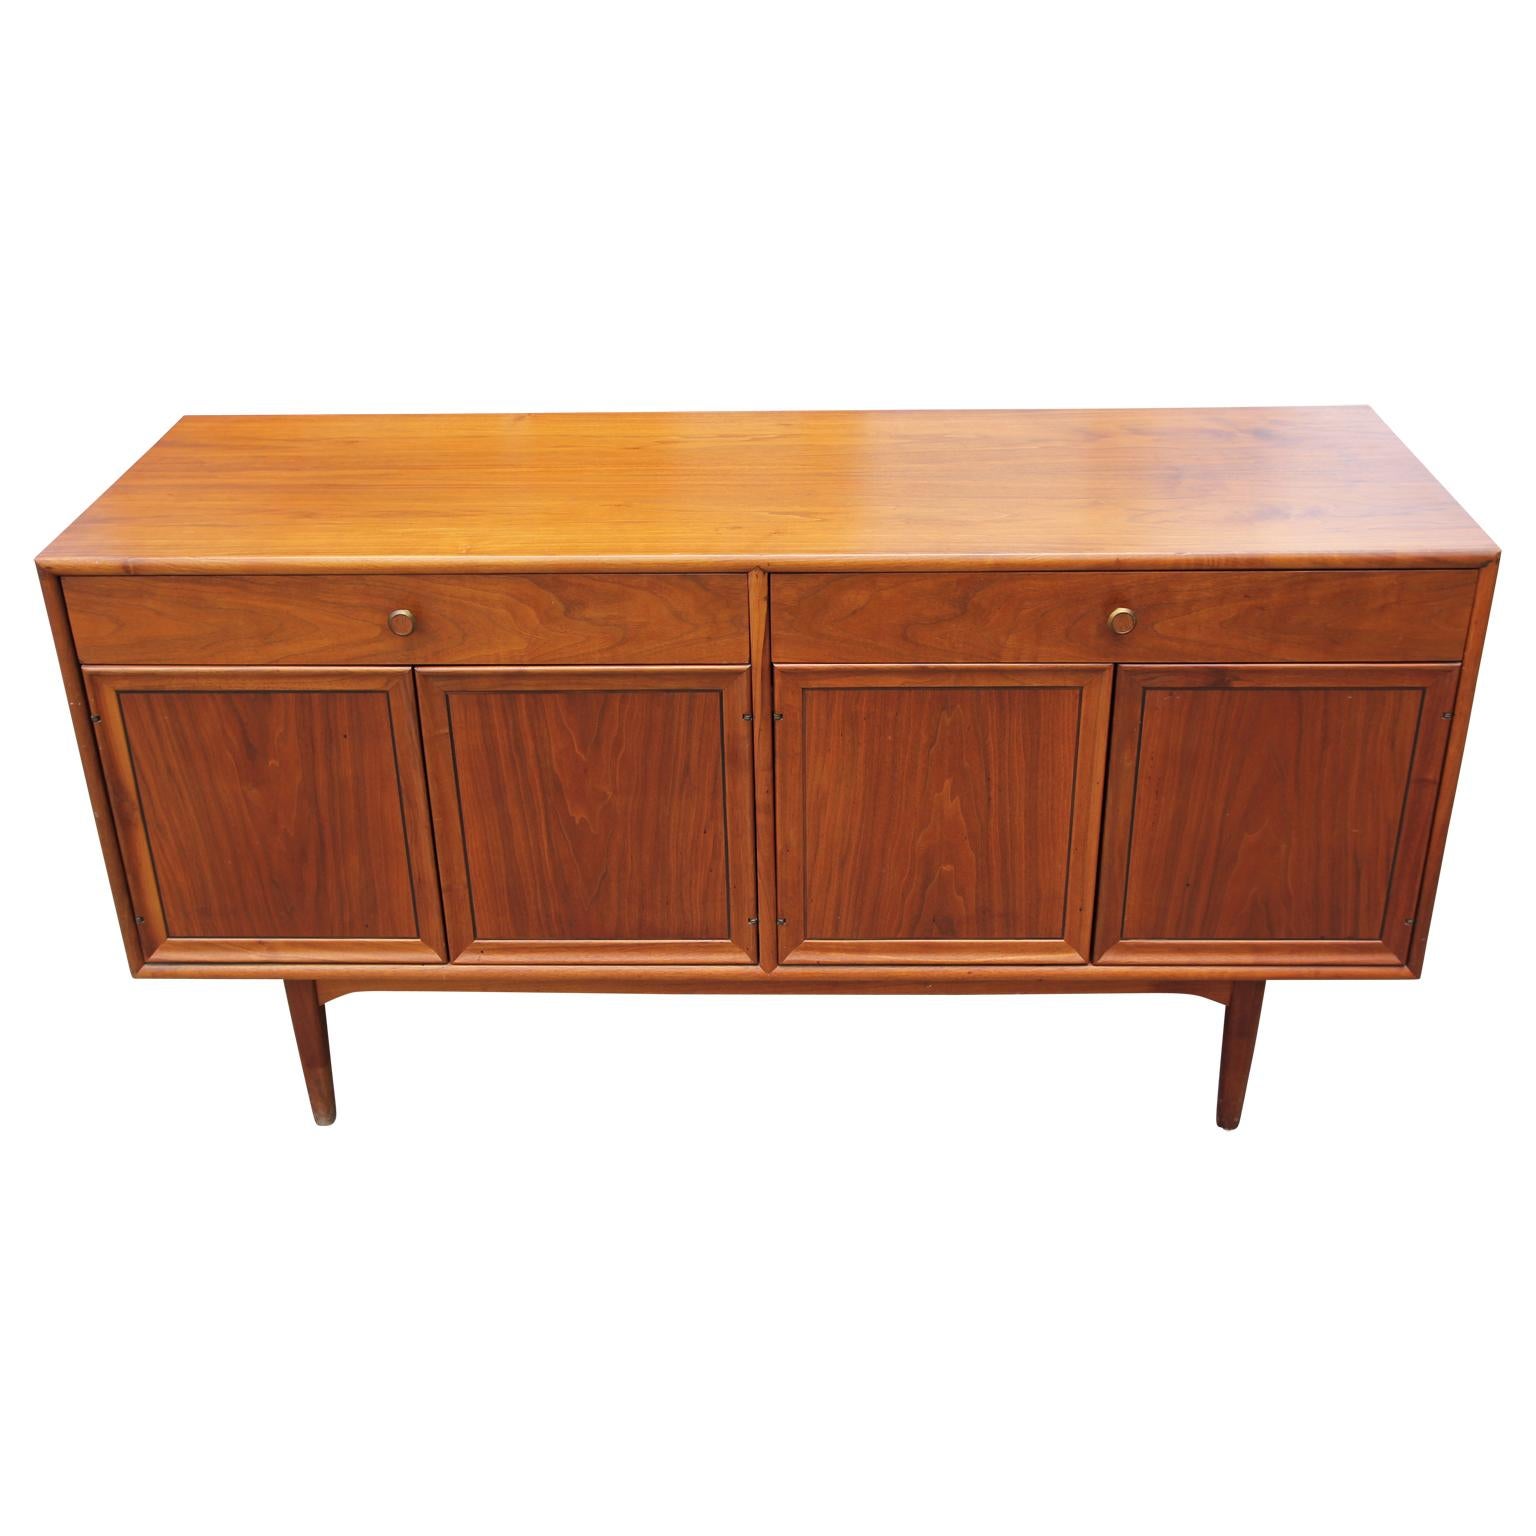 Mid-Century Modern buffet or sideboard made by Drexel. The buffet features two pull out drawers and two swing out door revealing deep storage space. On the inside of the drawer is the makers stamp.